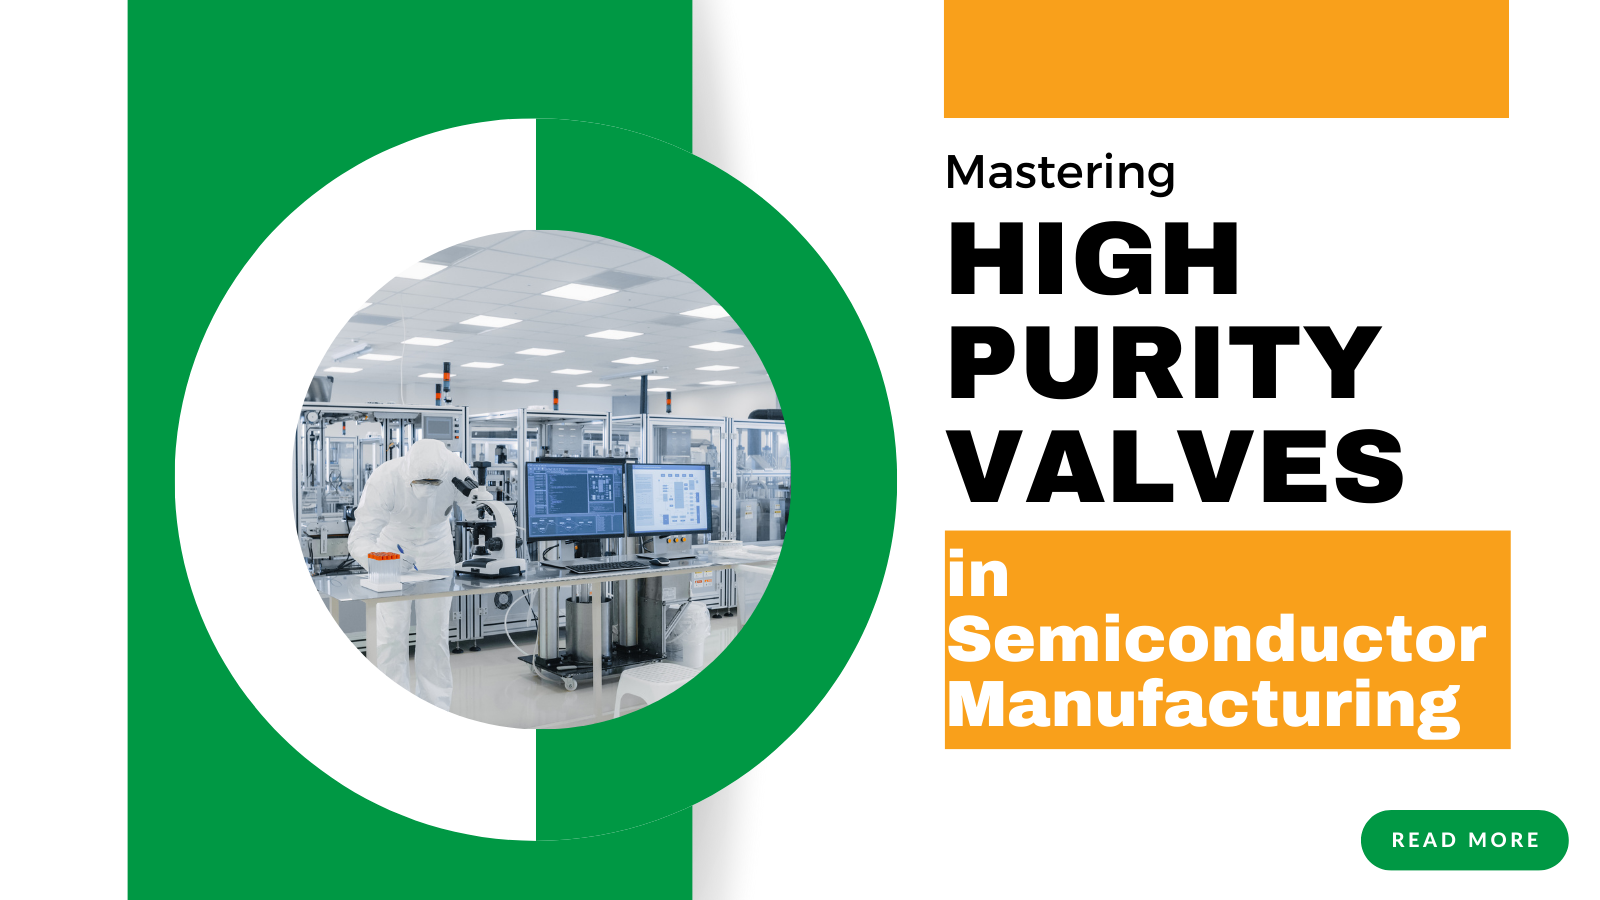 Mastering High Purity Valves in Semiconductor Manufacturing｜INOX-TEK